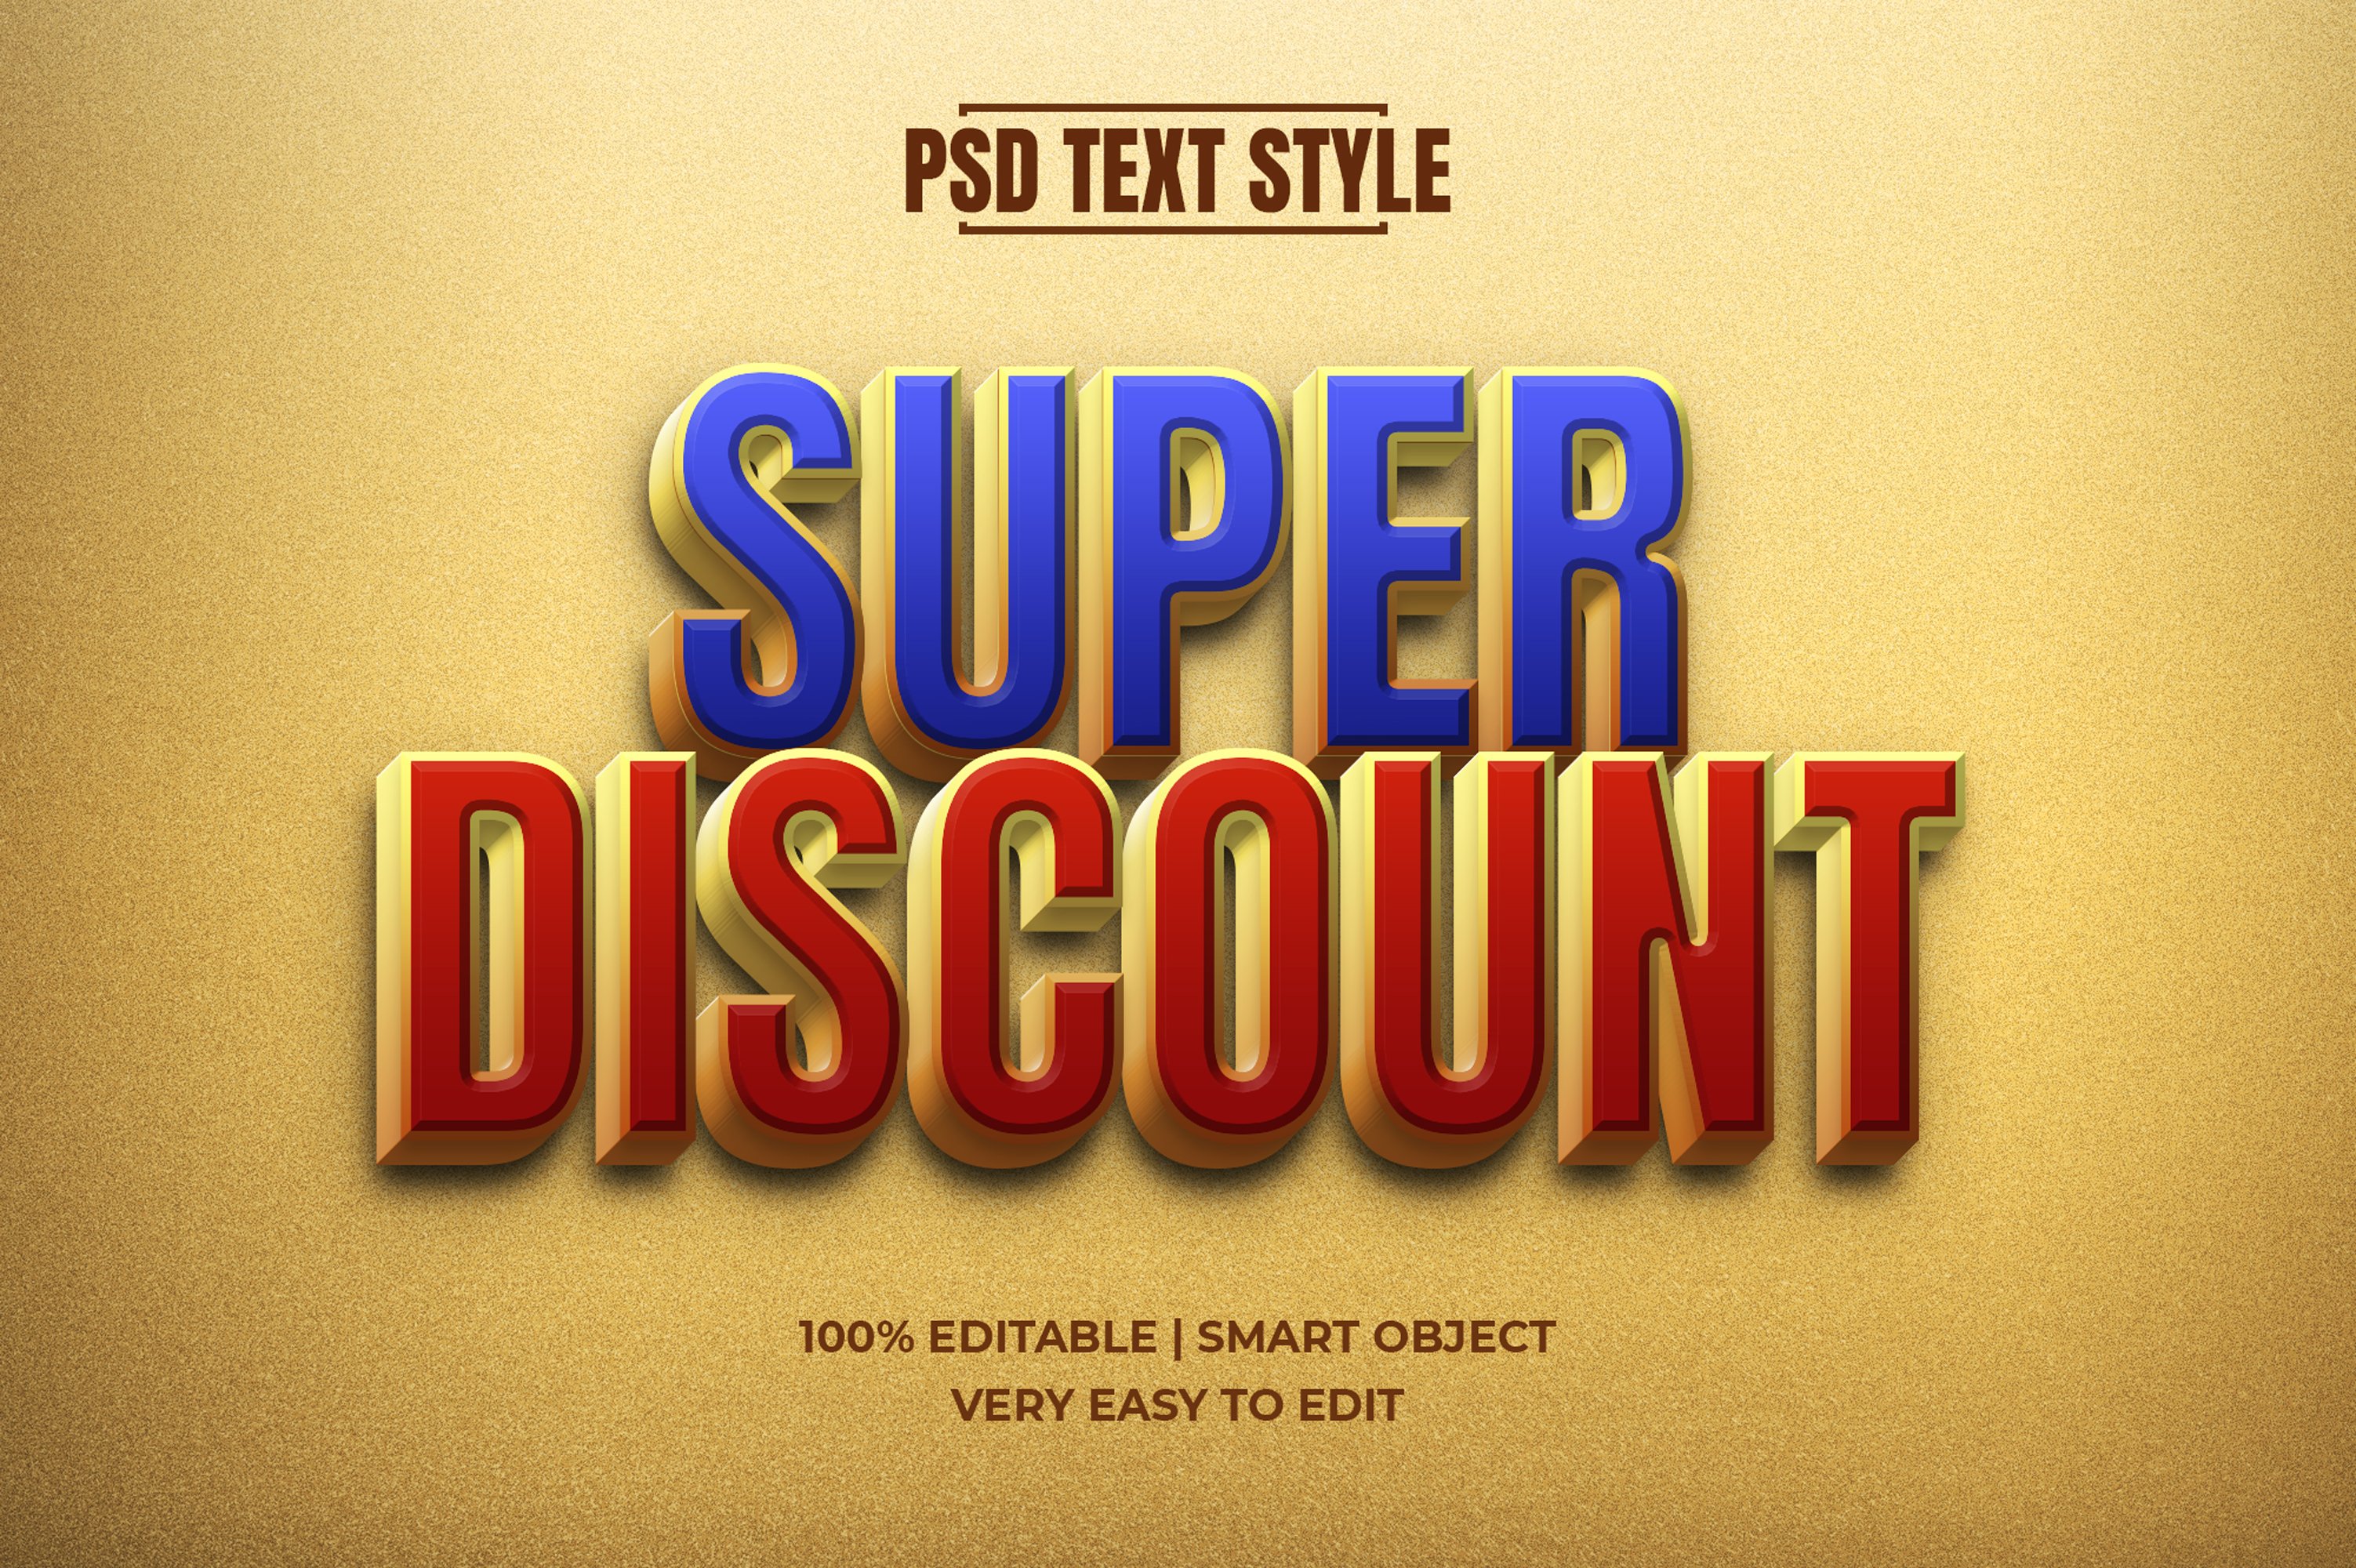 Discount 3D Text Effect Mockup PSDcover image.